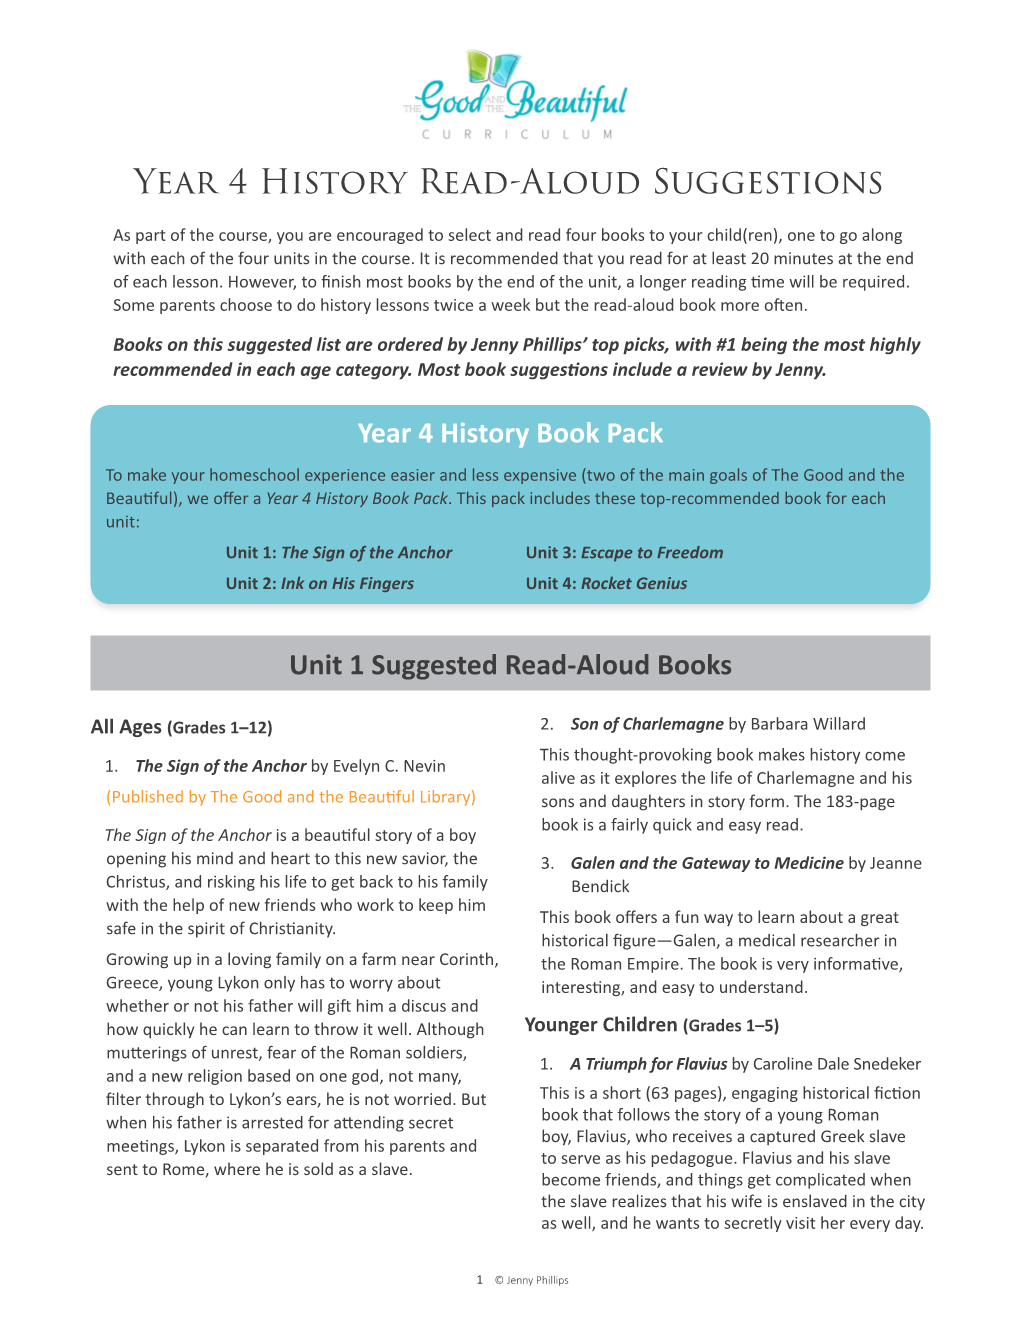 Year 4 History Read-Aloud Suggestions